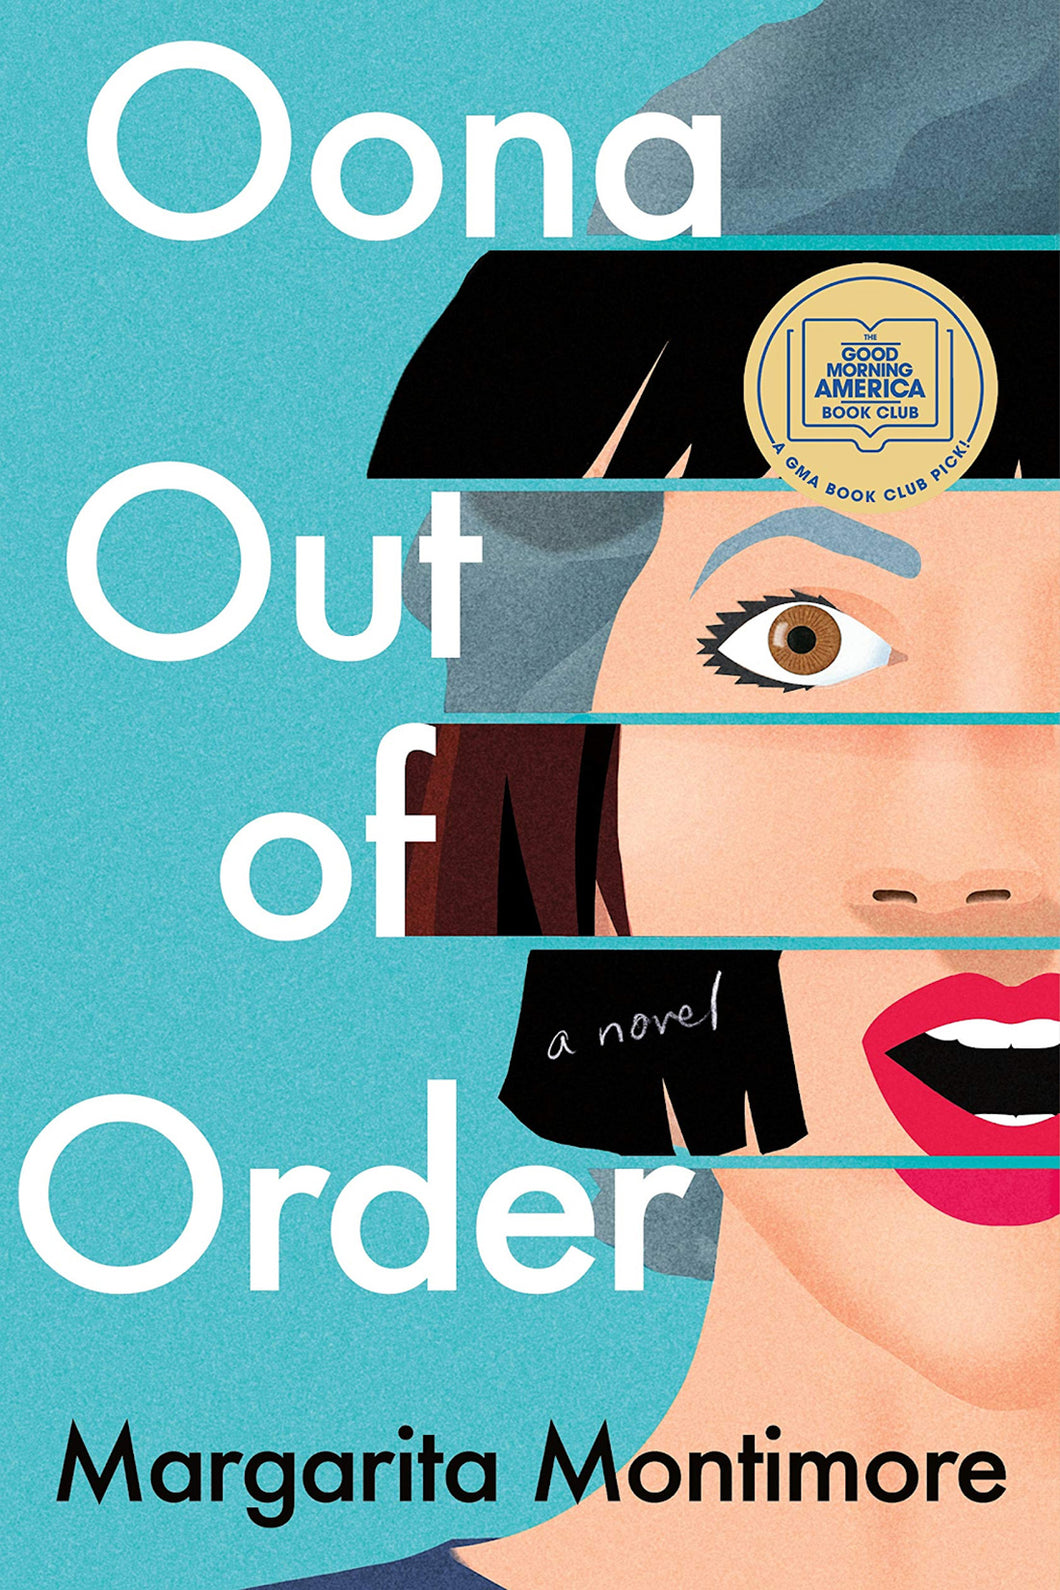 Oona Out of Order by Margarita Montimore / BOOK, CURATED BUNDLE OR BOOK CLUB KIT - Starting at $18!